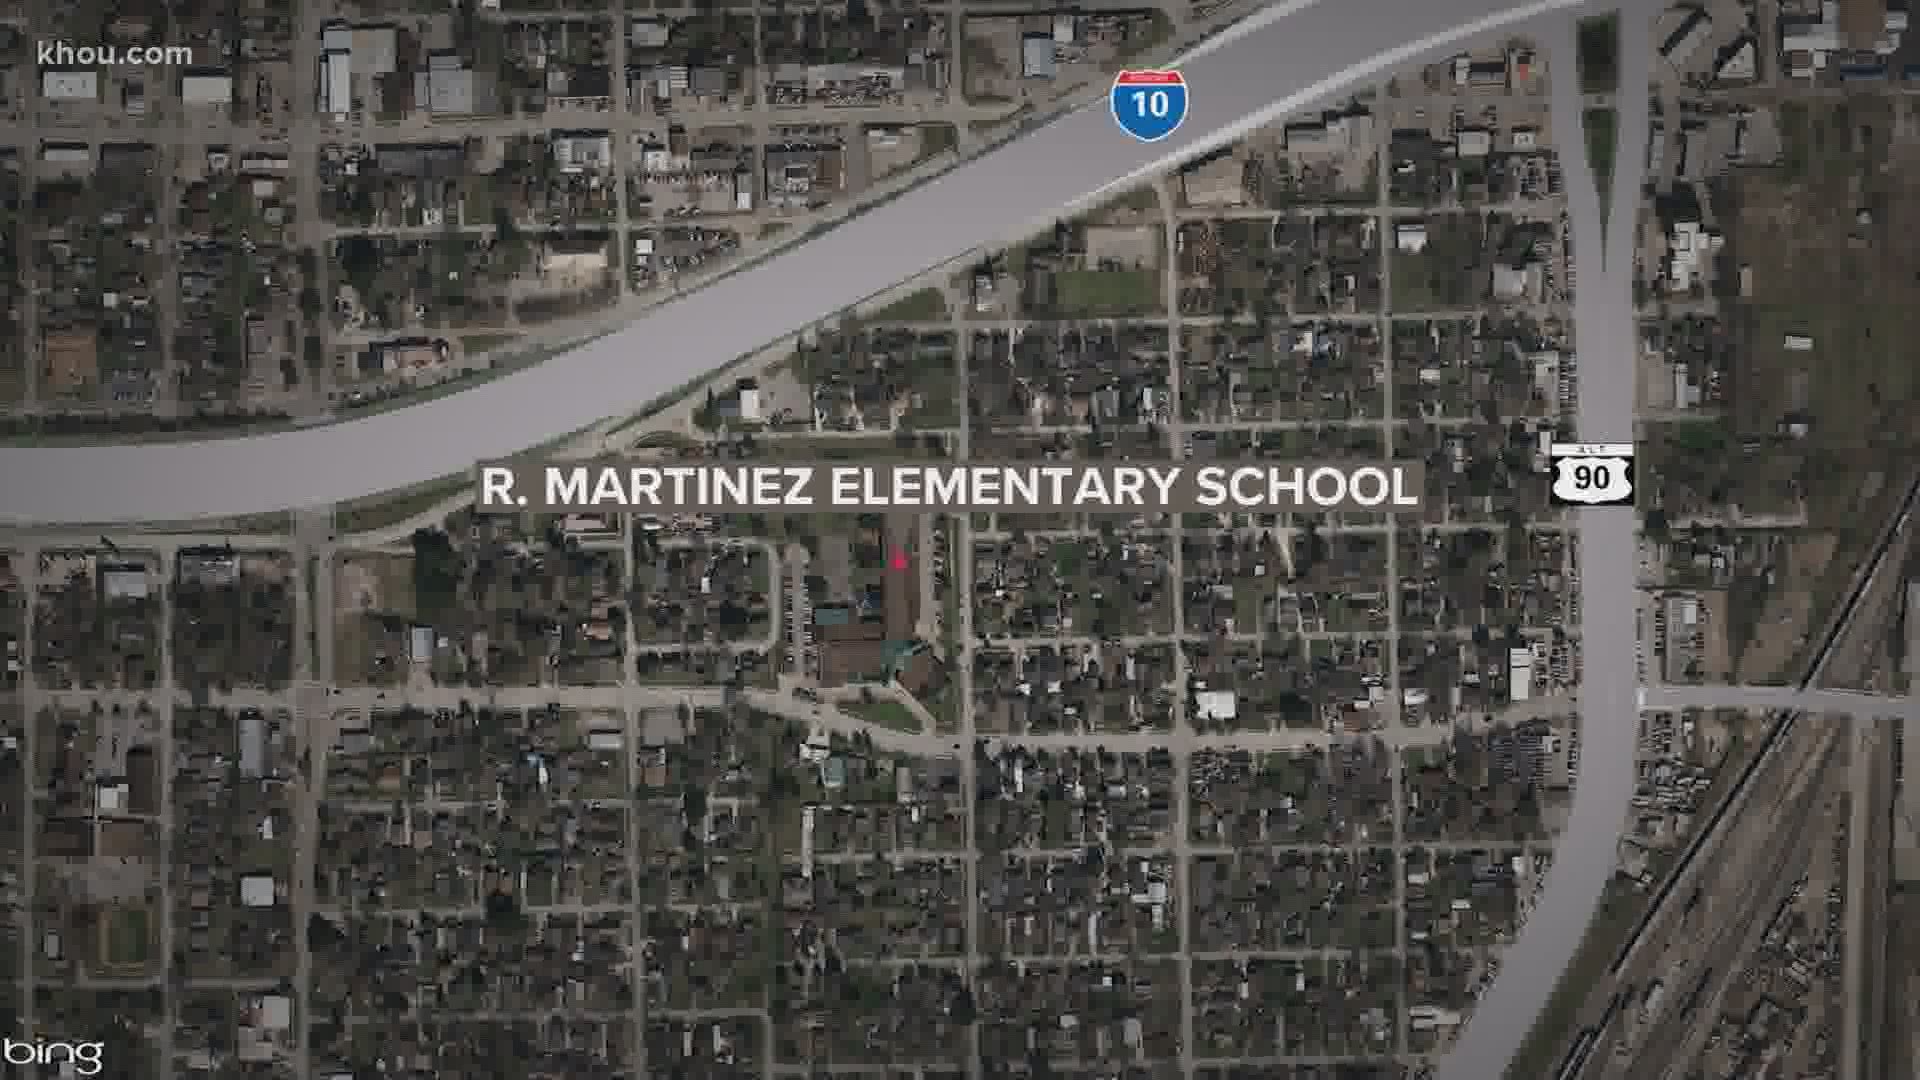 R. Martinez Elementary School will be closed due to confirmed coronavirus cases reported on campus.